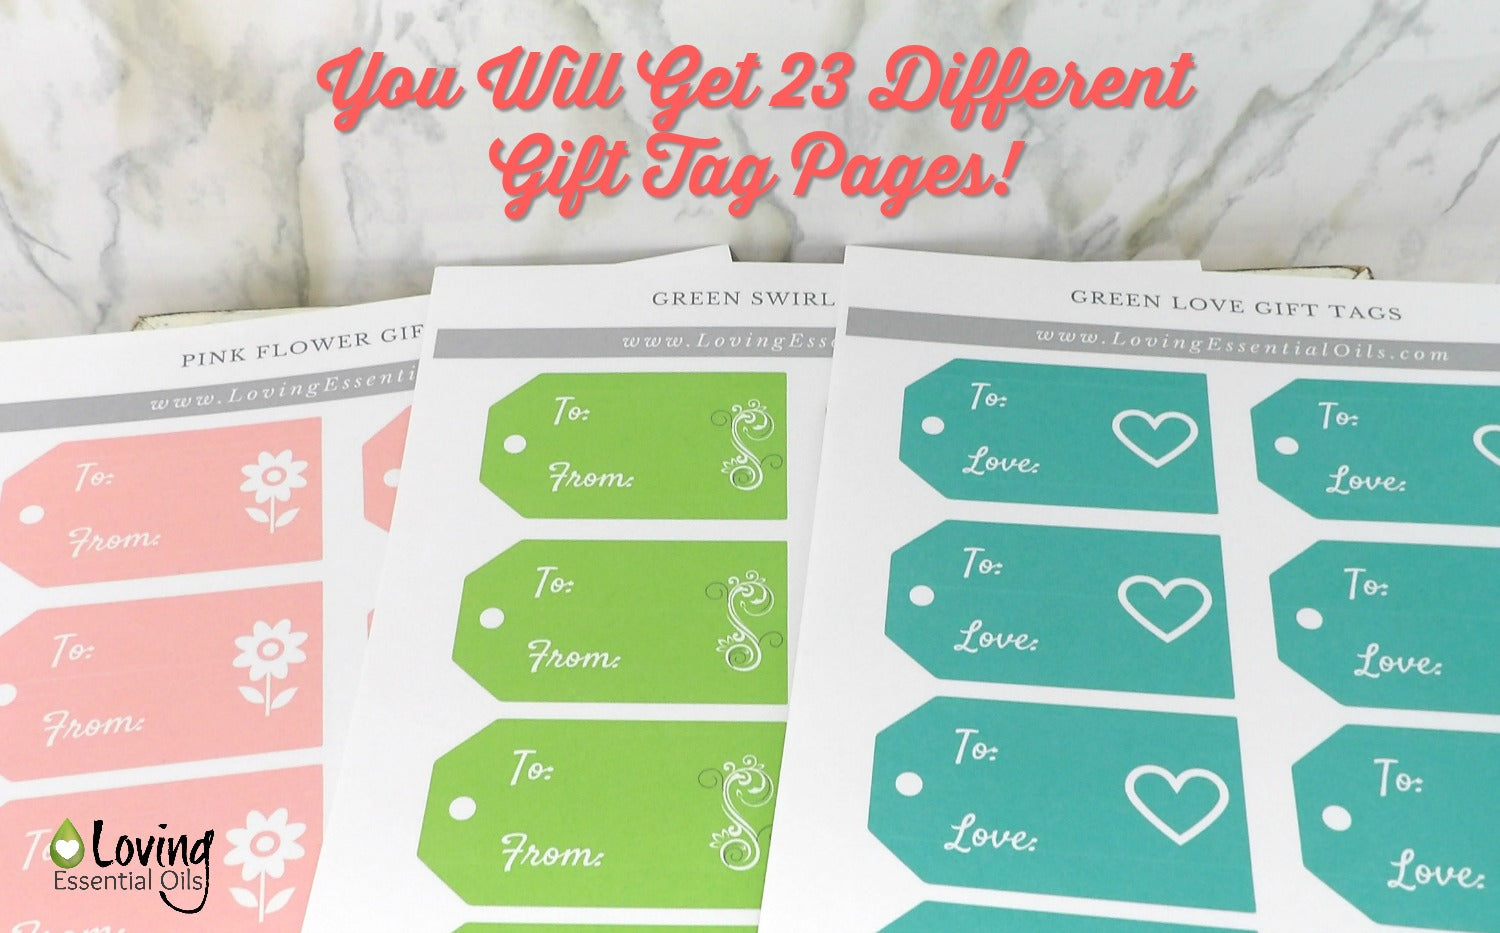 Free Printable Blank Gift Tags For DIY Essential Oi Recipes, Gift Bags, Gift baskets, Birthdays, Weddings